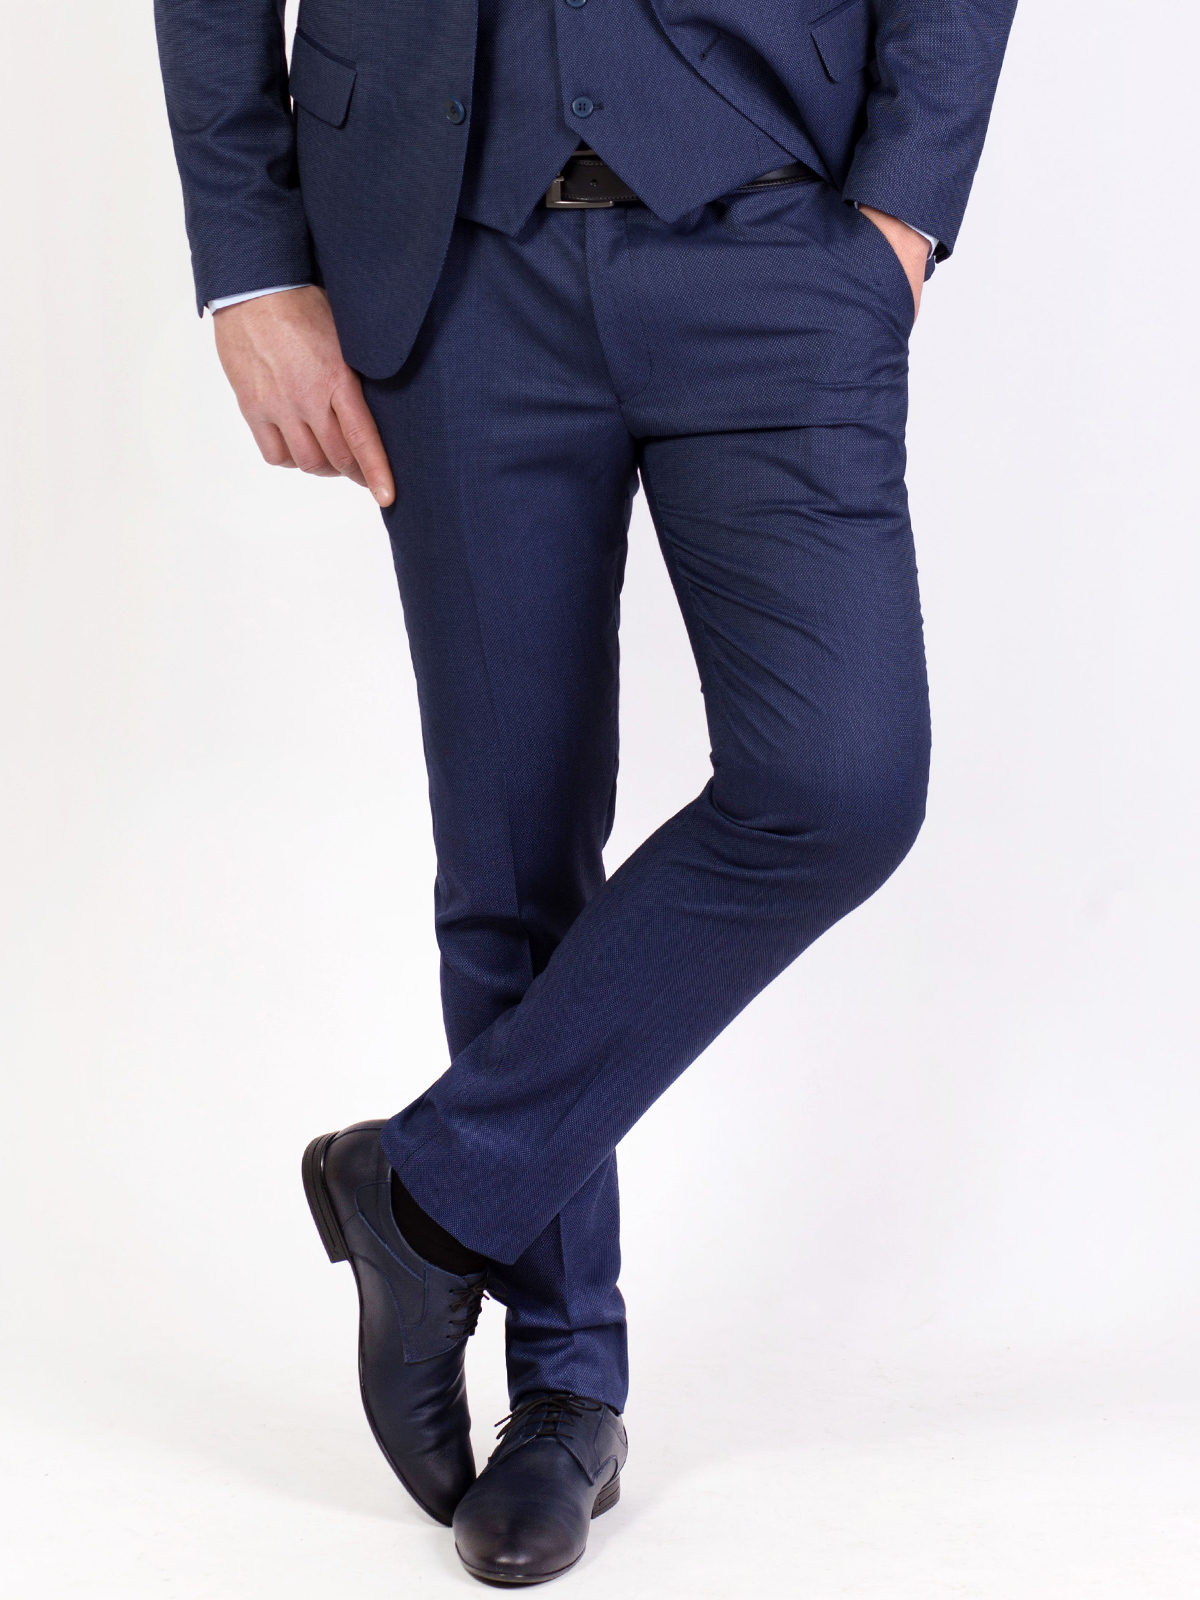 Pants in blue with embossed dots - 63306 € 38.81 img2